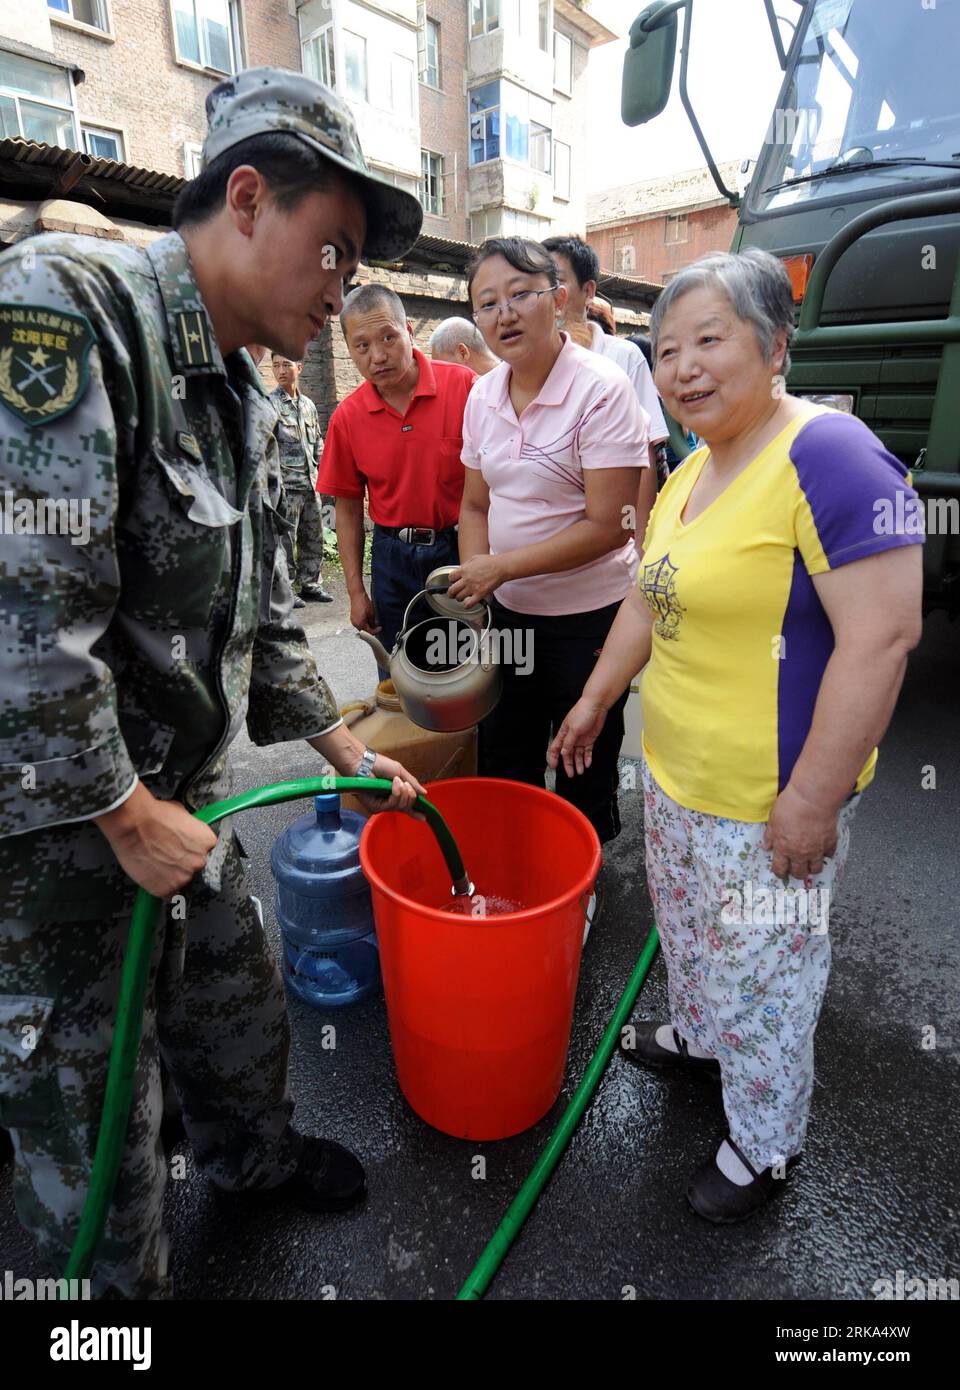 Bildnummer: 54269610  Datum: 02.08.2010  Copyright: imago/Xinhua (100802) -- TONGHUA, Aug. 2, 2010 (Xinhua) -- Soldiers give water to local residents in Tonghua City, northeast China s Jilin Province, Aug. 2, 2010. Torrential rains have damaged water pipelines leaving 300,000 without tap water for two days in Tonghua, officials said Monday. More than 300 workers had been mobilized to quickly restore the water supply, said Wang Ruimin, head of the public utility bureau in Tonghua. (Xinhua/Jiang Lin) (zhs) (7)CHINA-JILIN-TONGHUA-WATER-FLOOD (CN) PUBLICATIONxNOTxINxCHN Gesellschaft Trinkwasser Tr Stock Photo